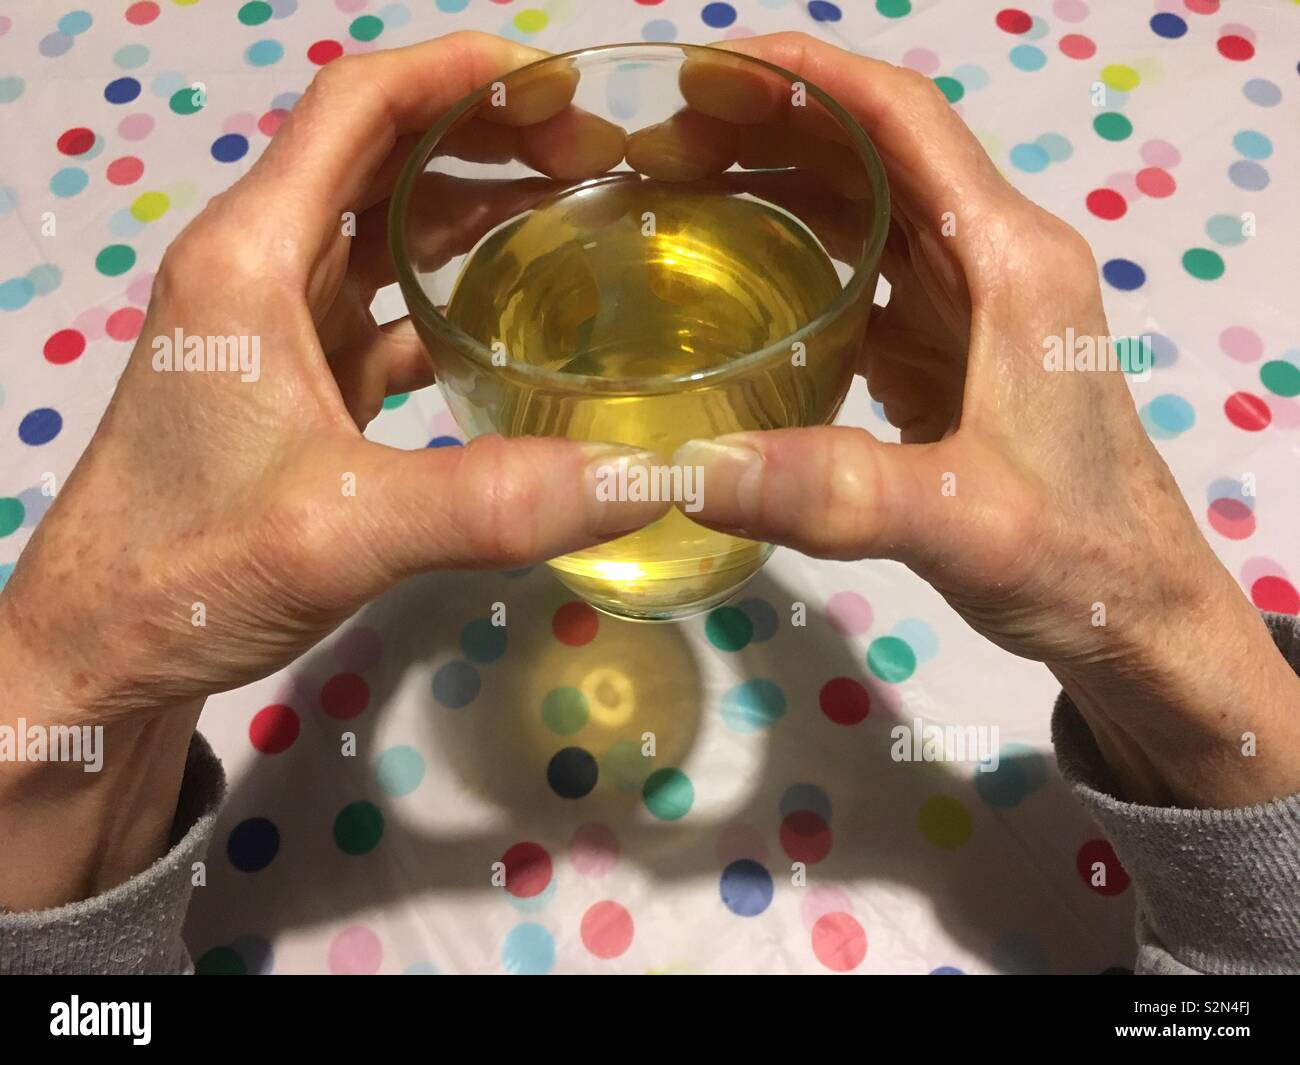 Elderly Caucasian woman’s hands holding a glass full of green tea with lemon myrtle which has been reflected on a plastic pastel polka dotted table cover. Stock Photo